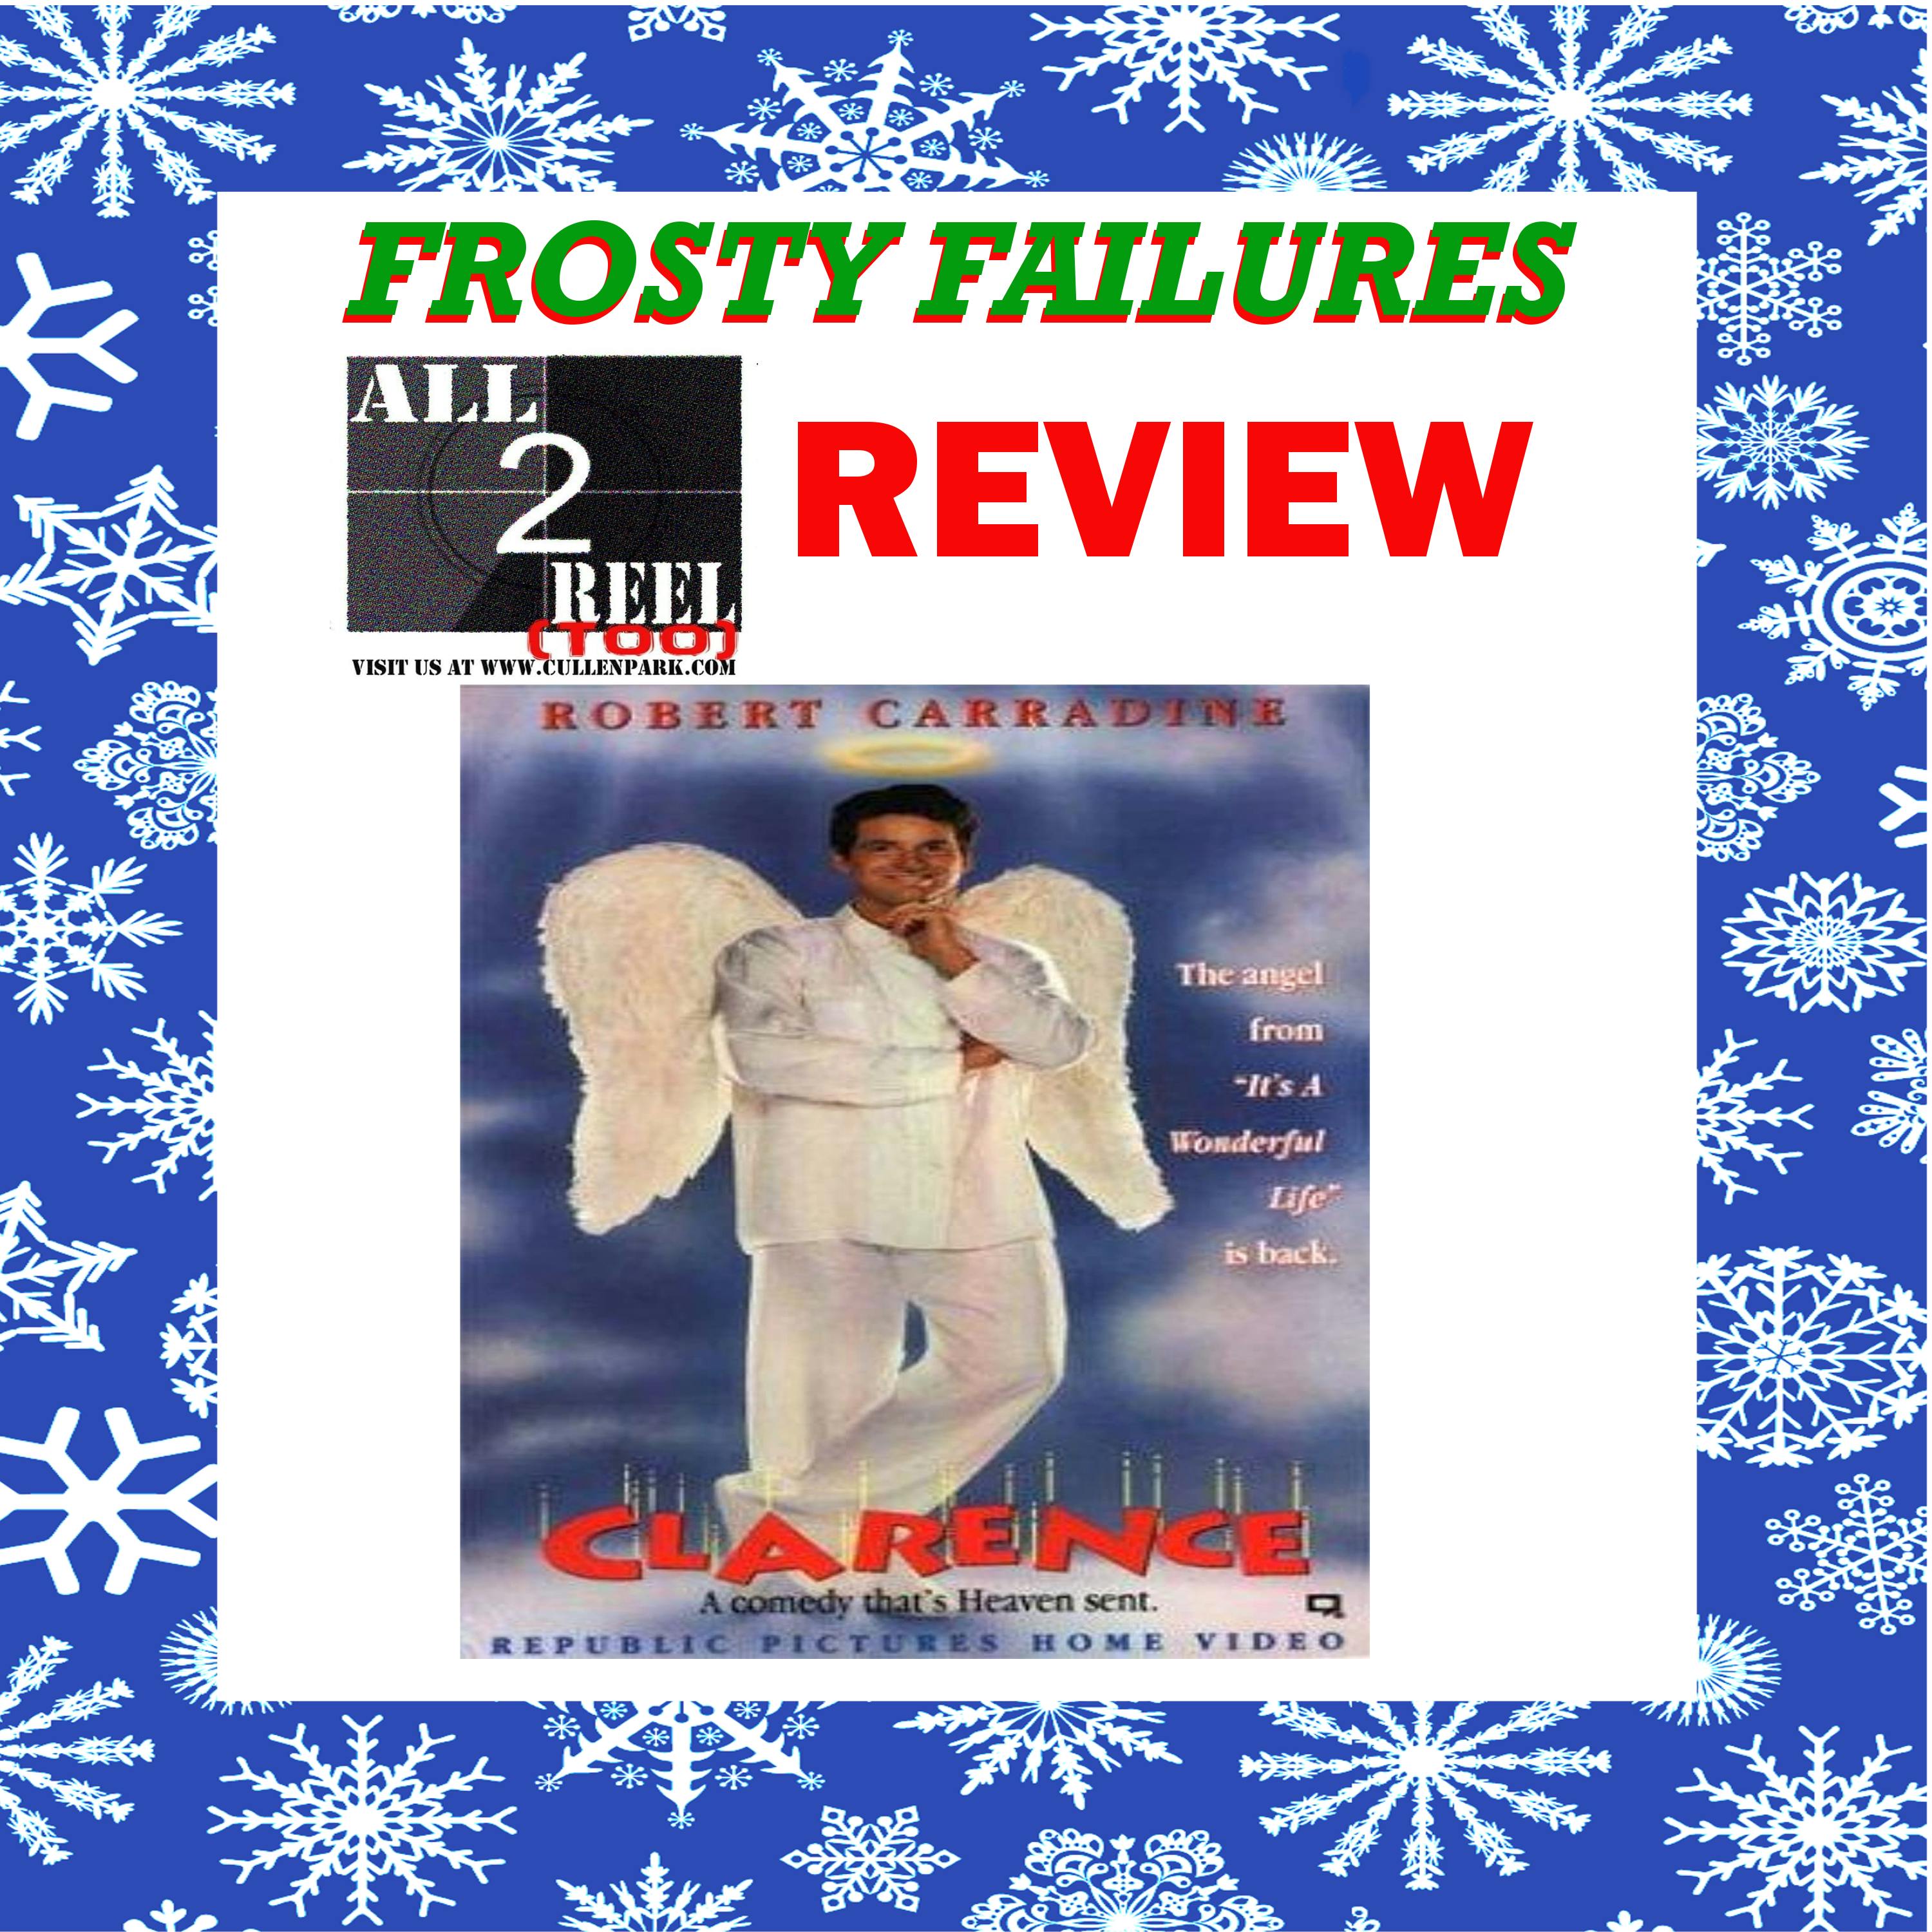 Clarence (1990) - FROSTY FAILURES/DIRECT FROM HELL REVIEW